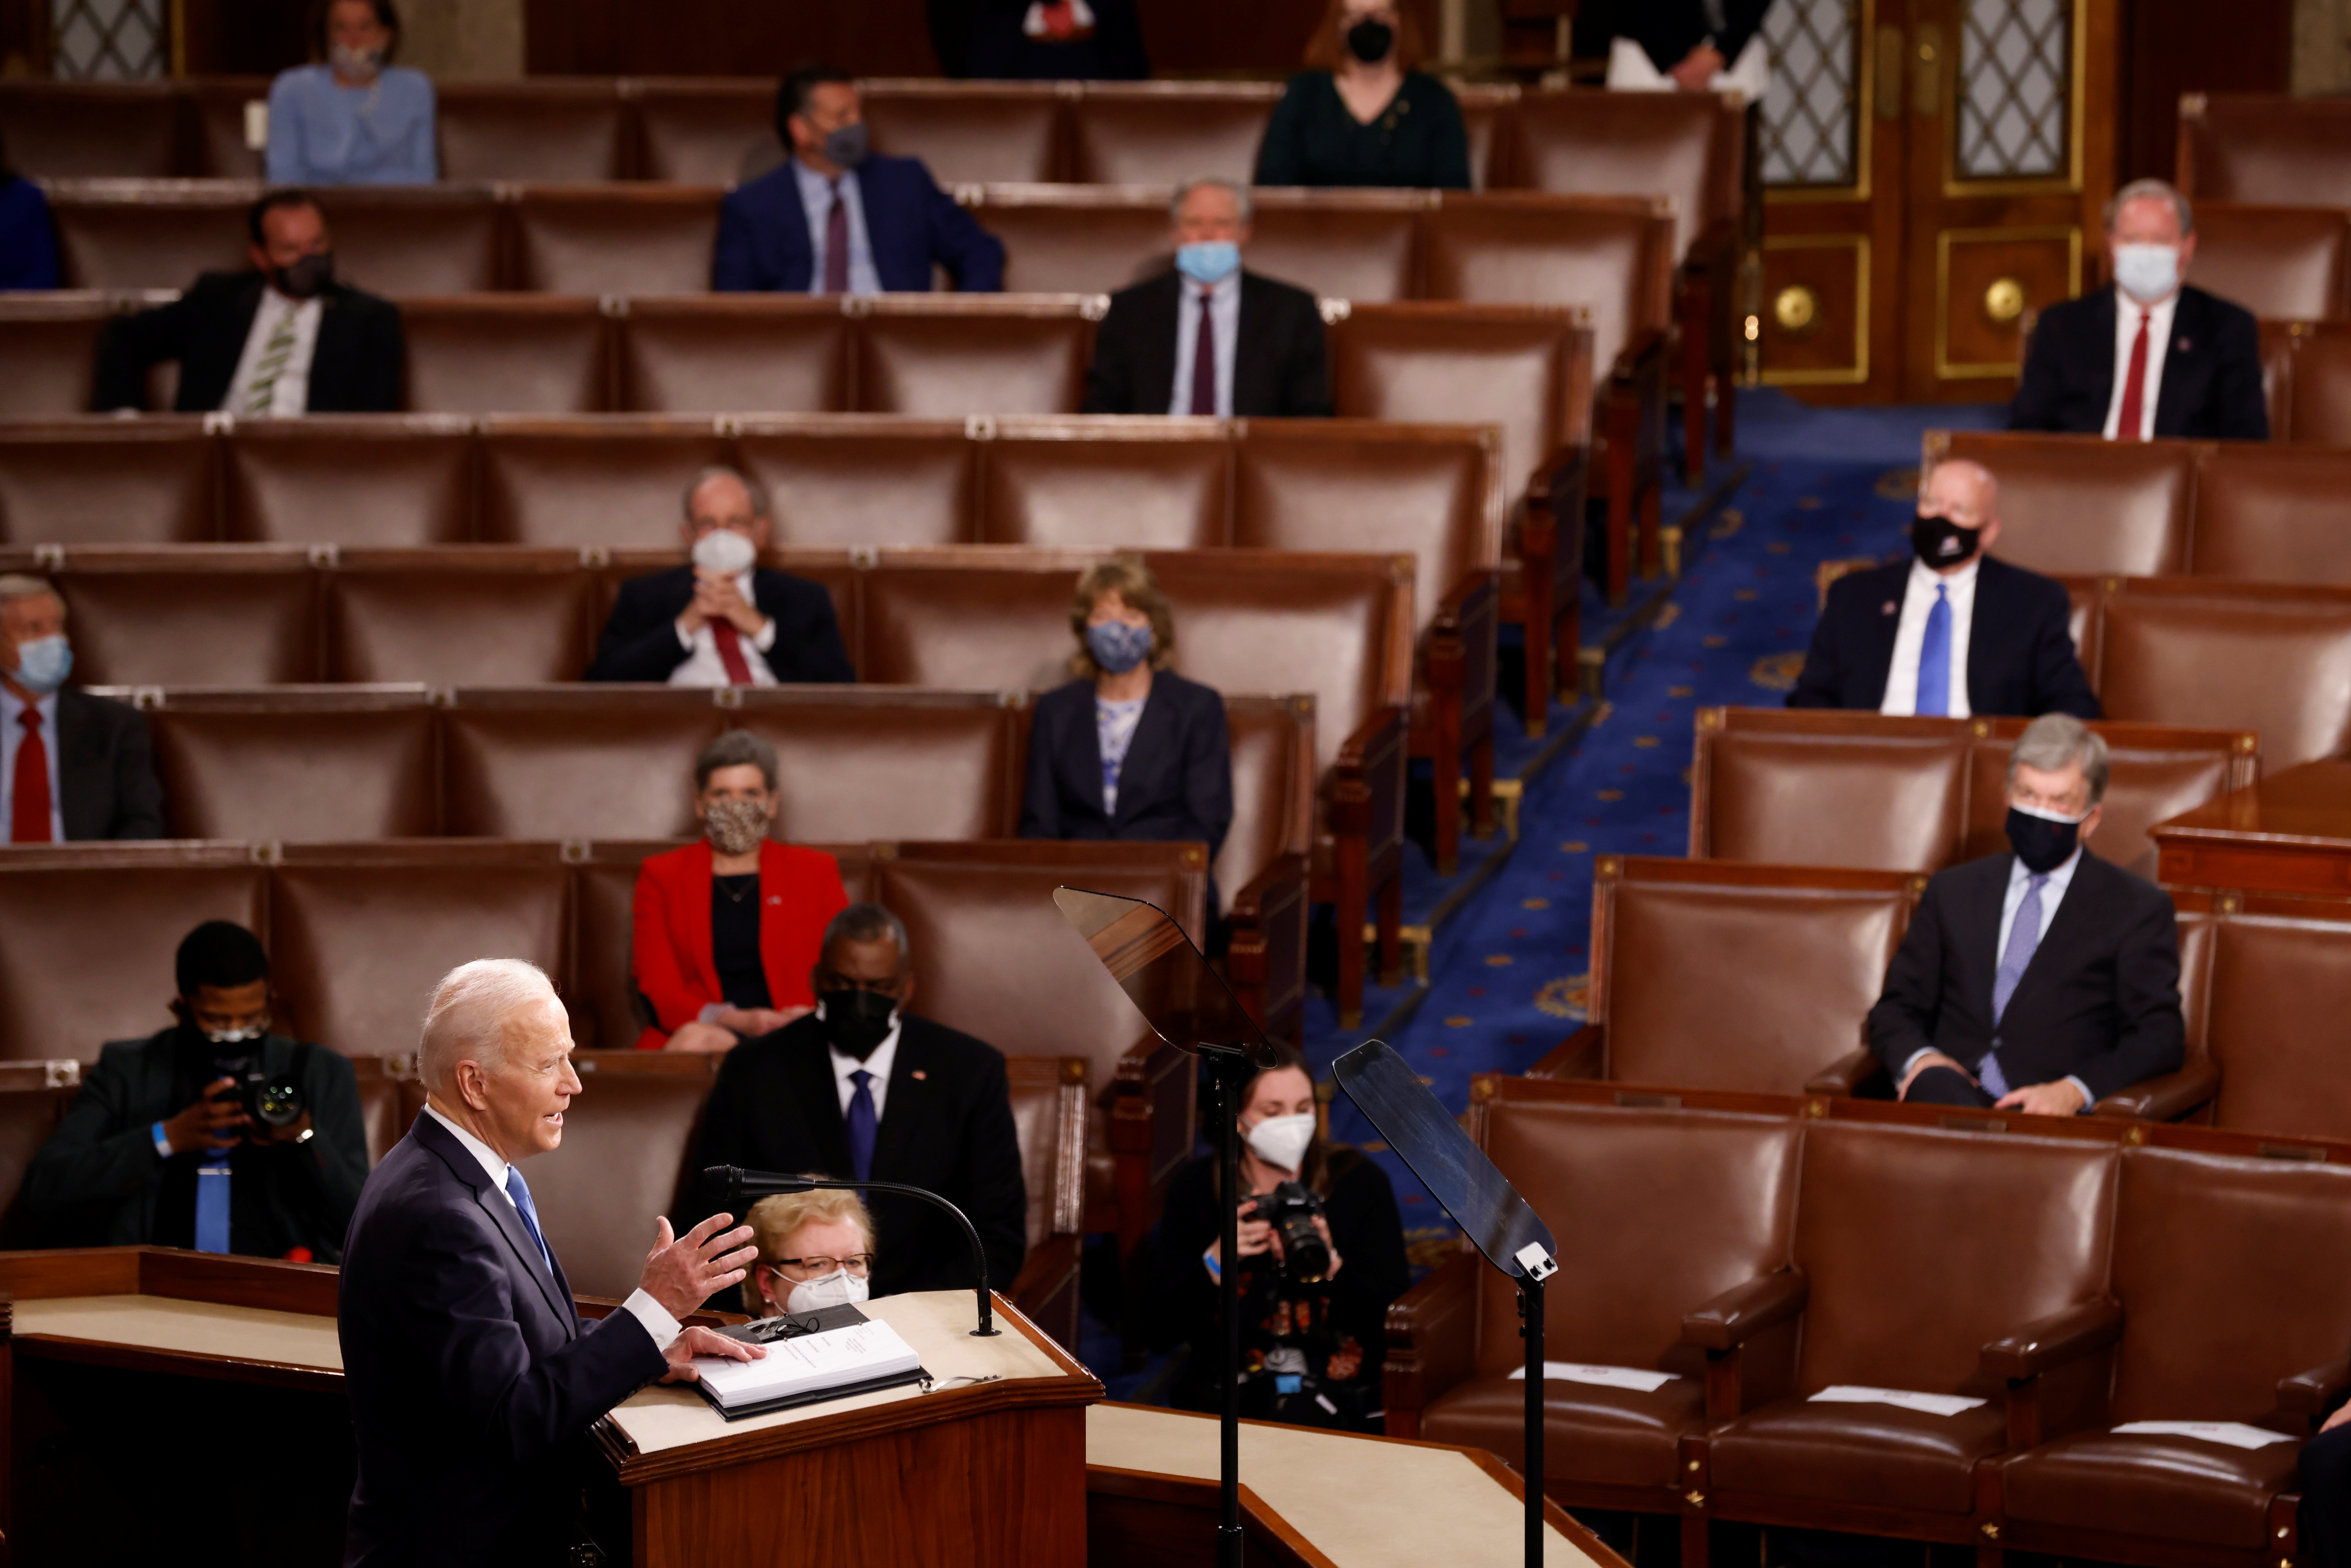 U.S. President Joe Biden delivers his first address to a joint session of the U.S. Congress at the U.S. Capitol in Washington